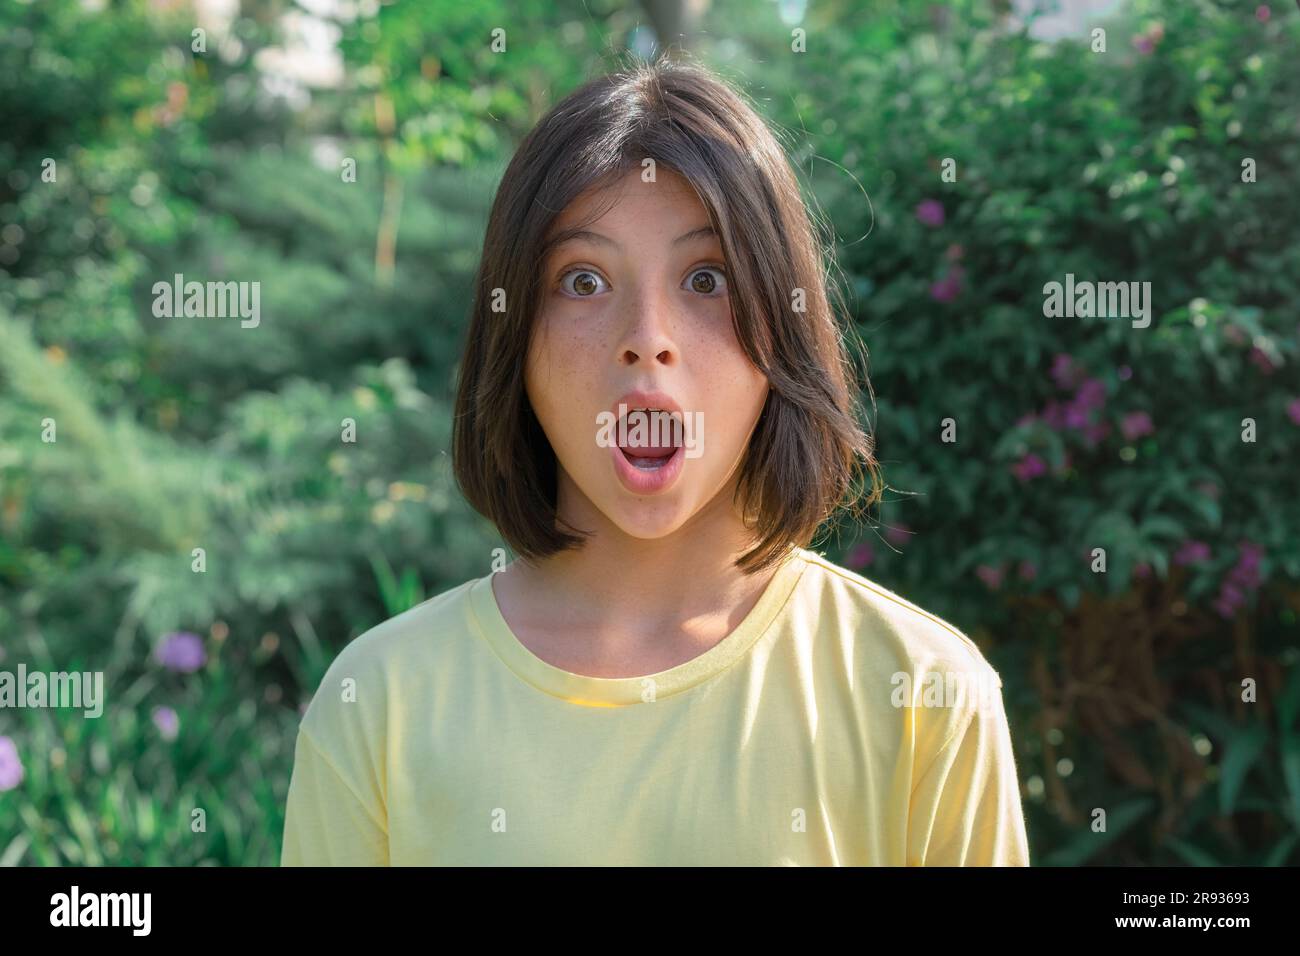 Close-up portrait of a very surprised teenage girl with wide open eyes and mouth against the background of greenery. Stock Photo